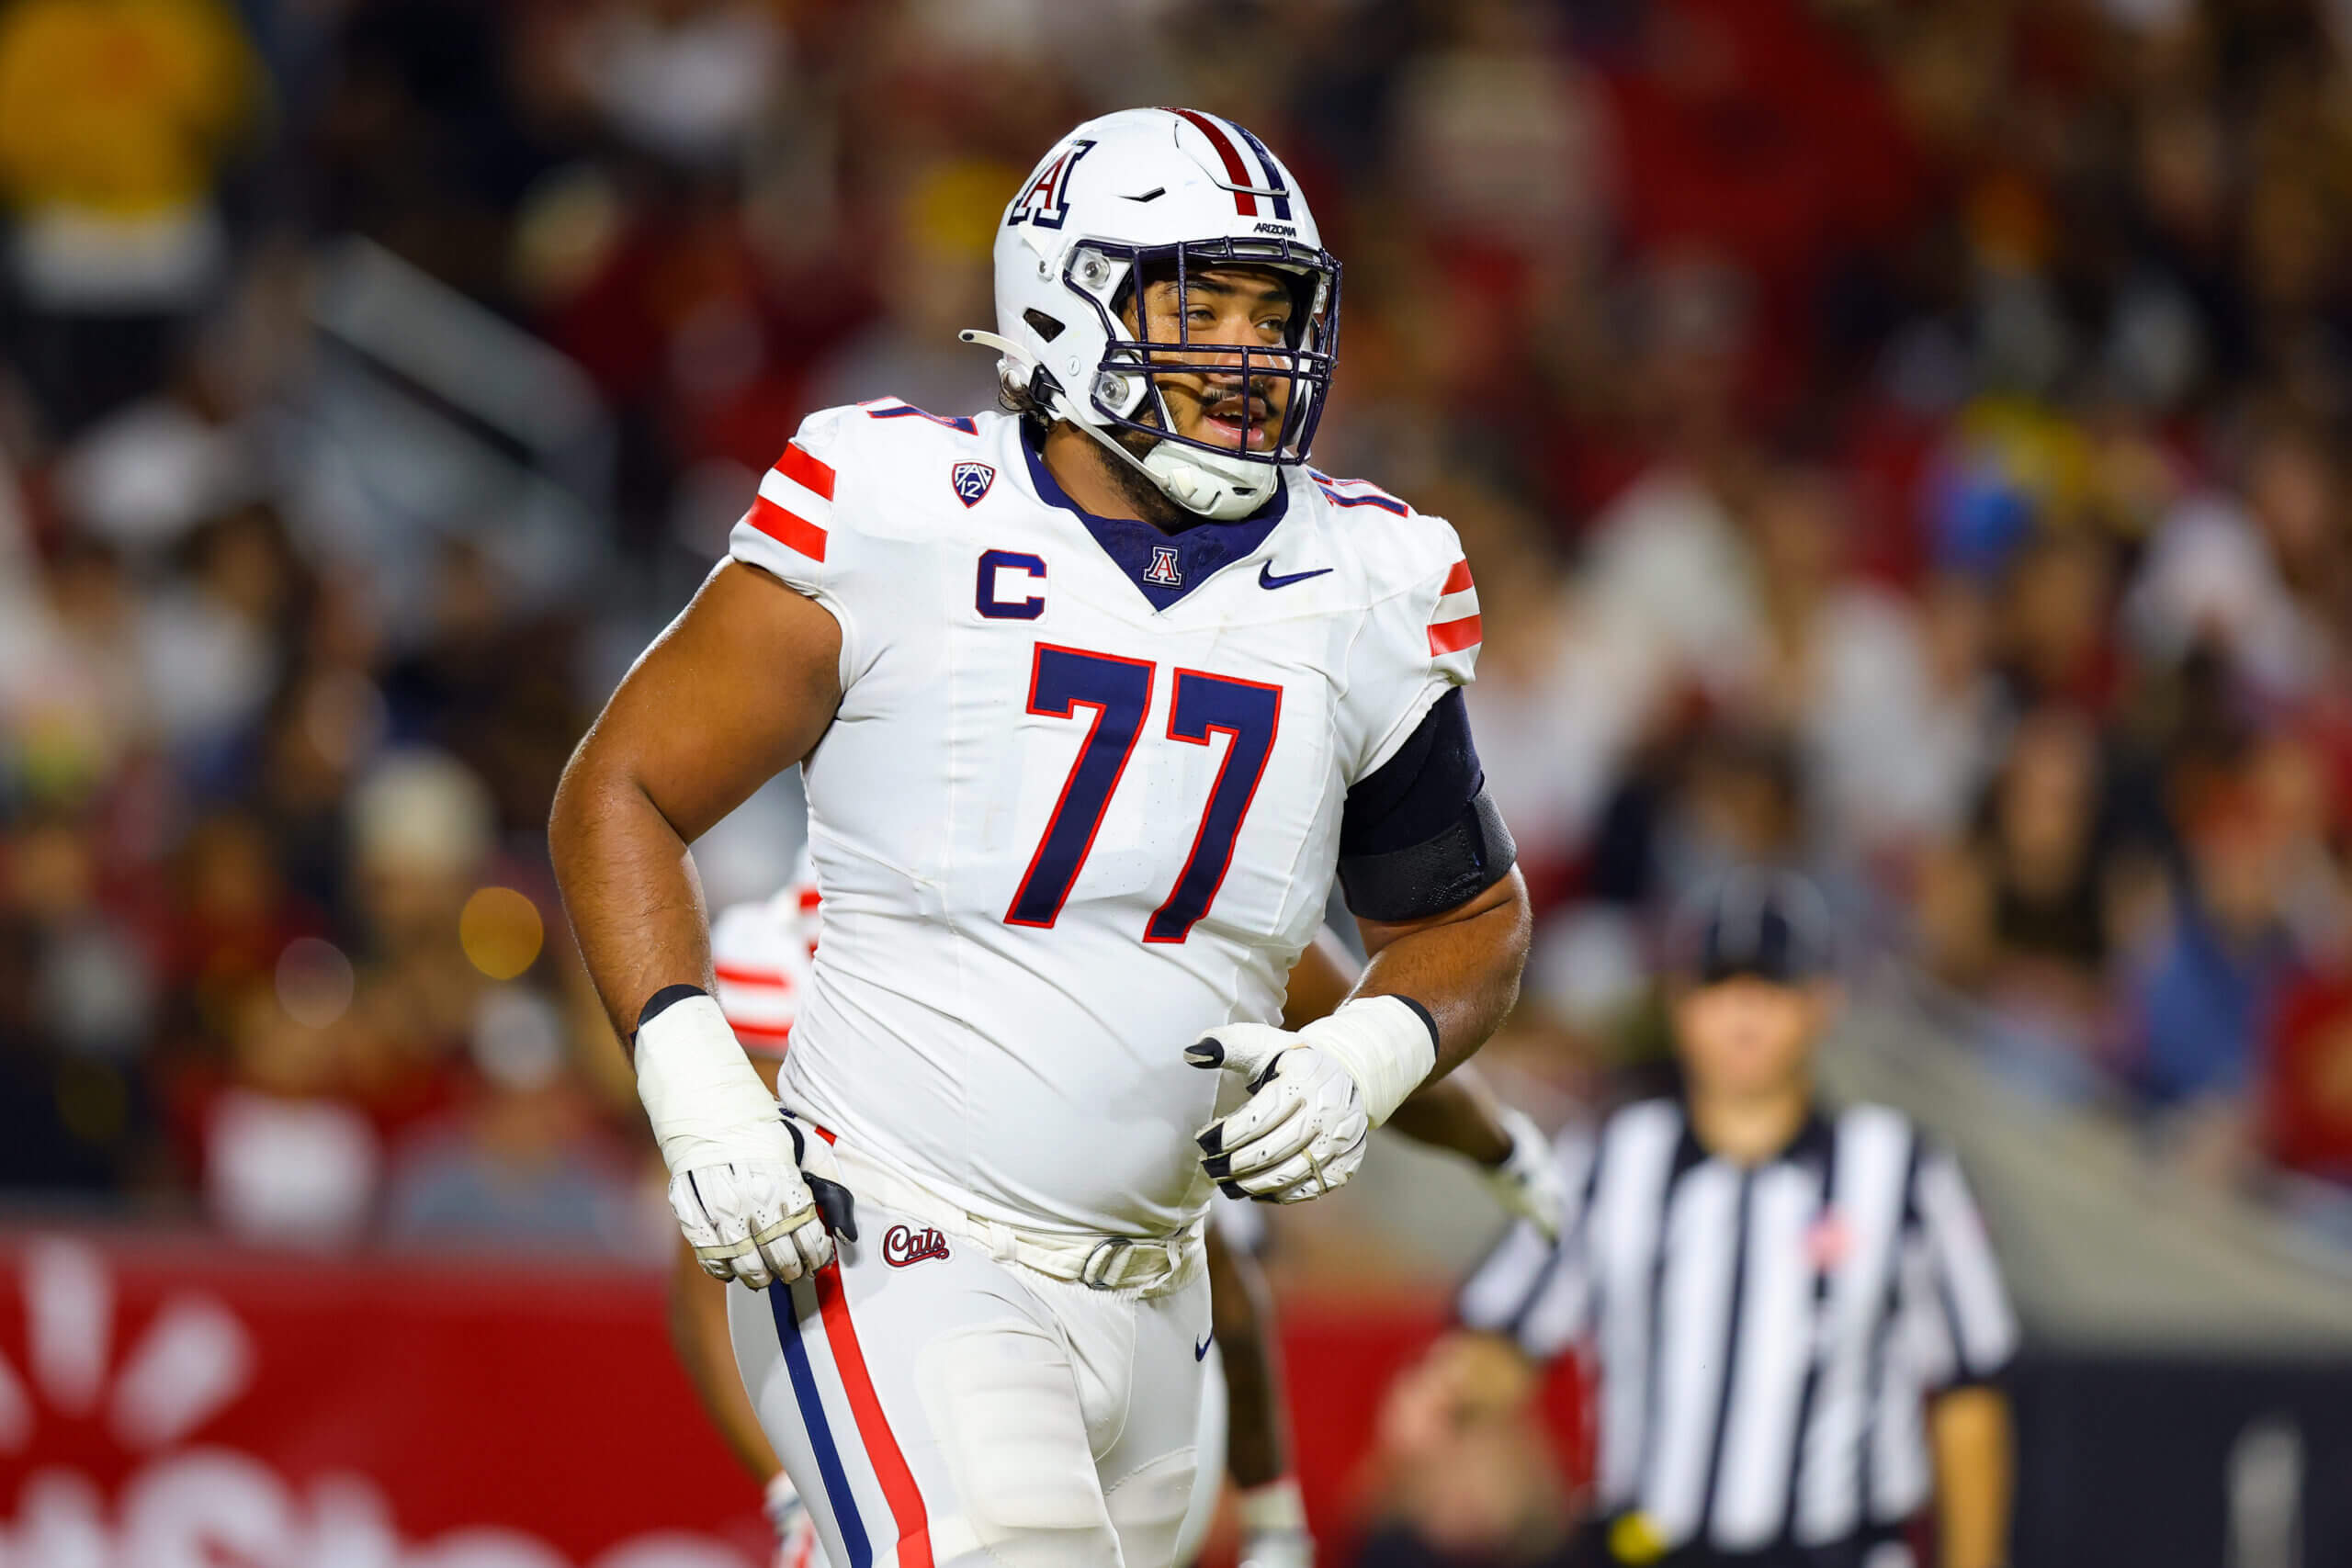 Why the Packers drafted OT Jordan Morgan: Is he their left tackle of the future?